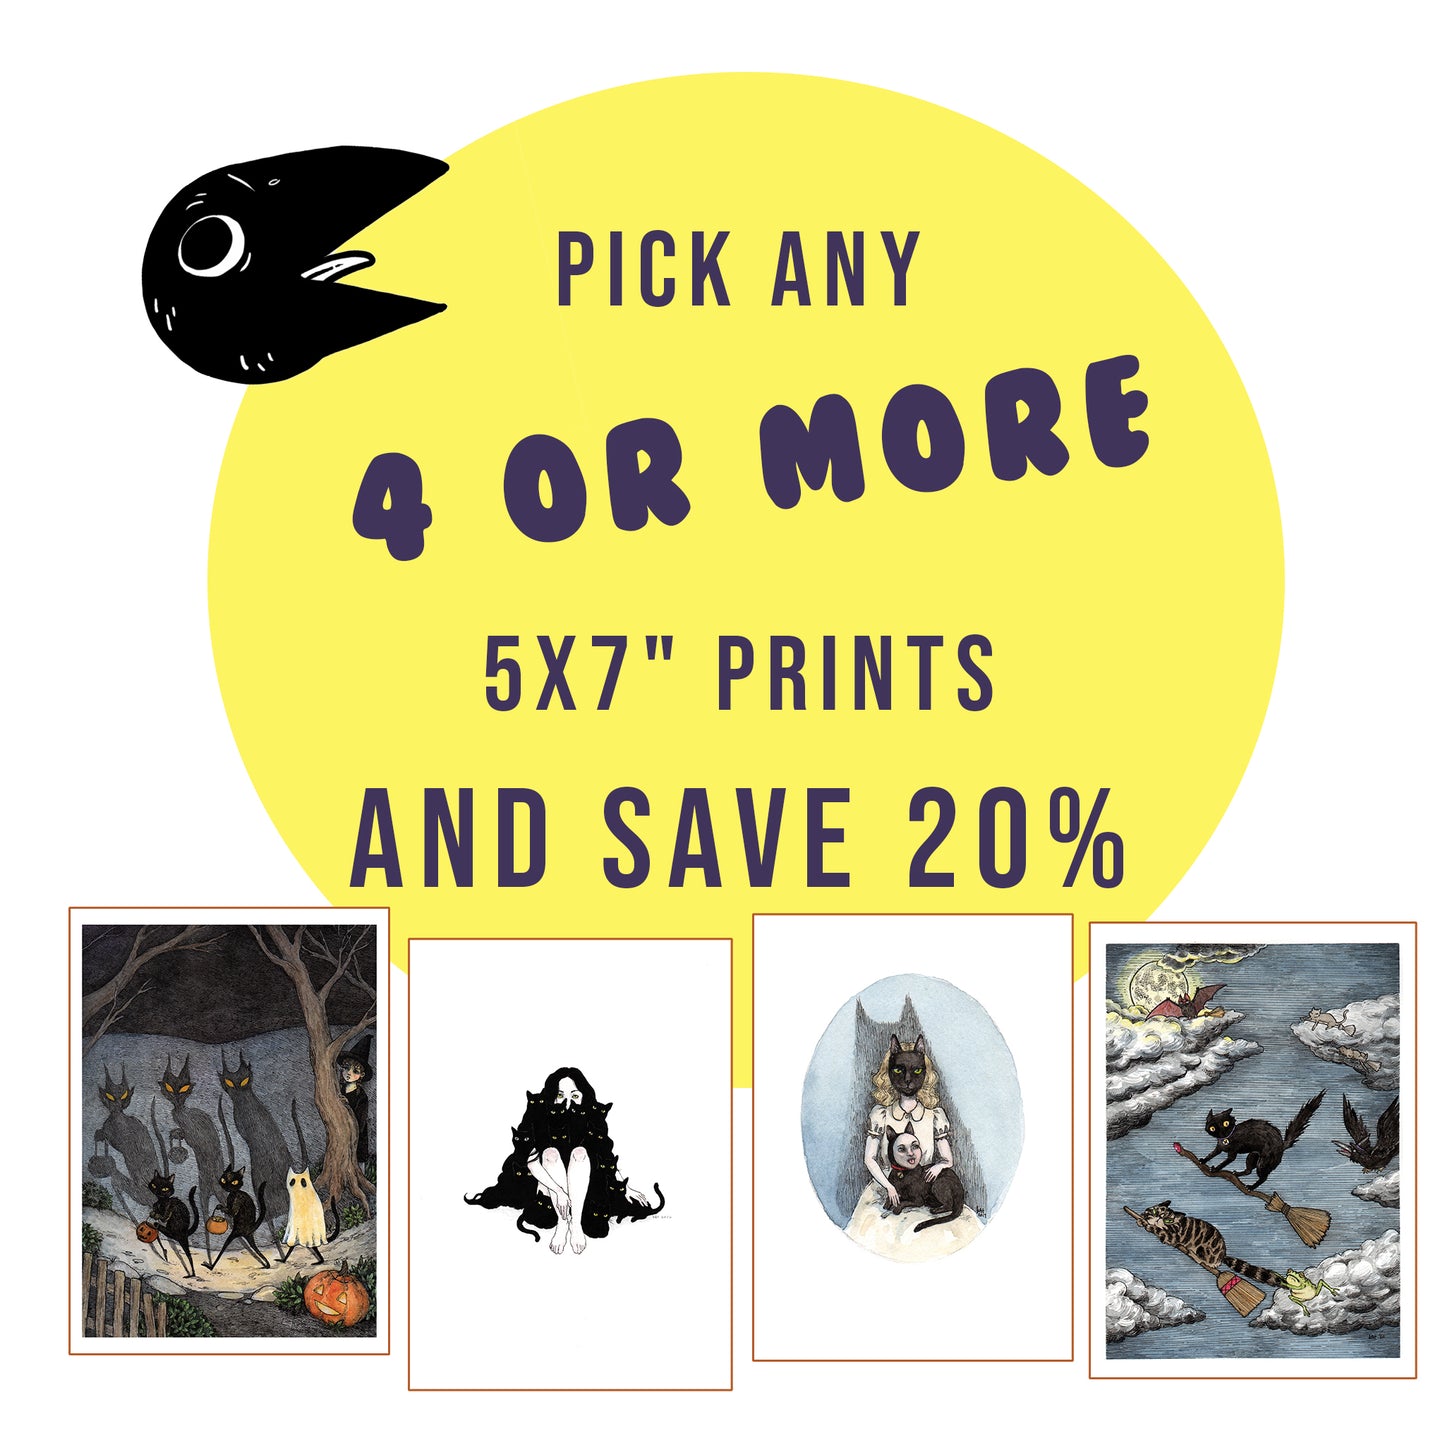 Any FOUR or more 5x7" prints - save 20%